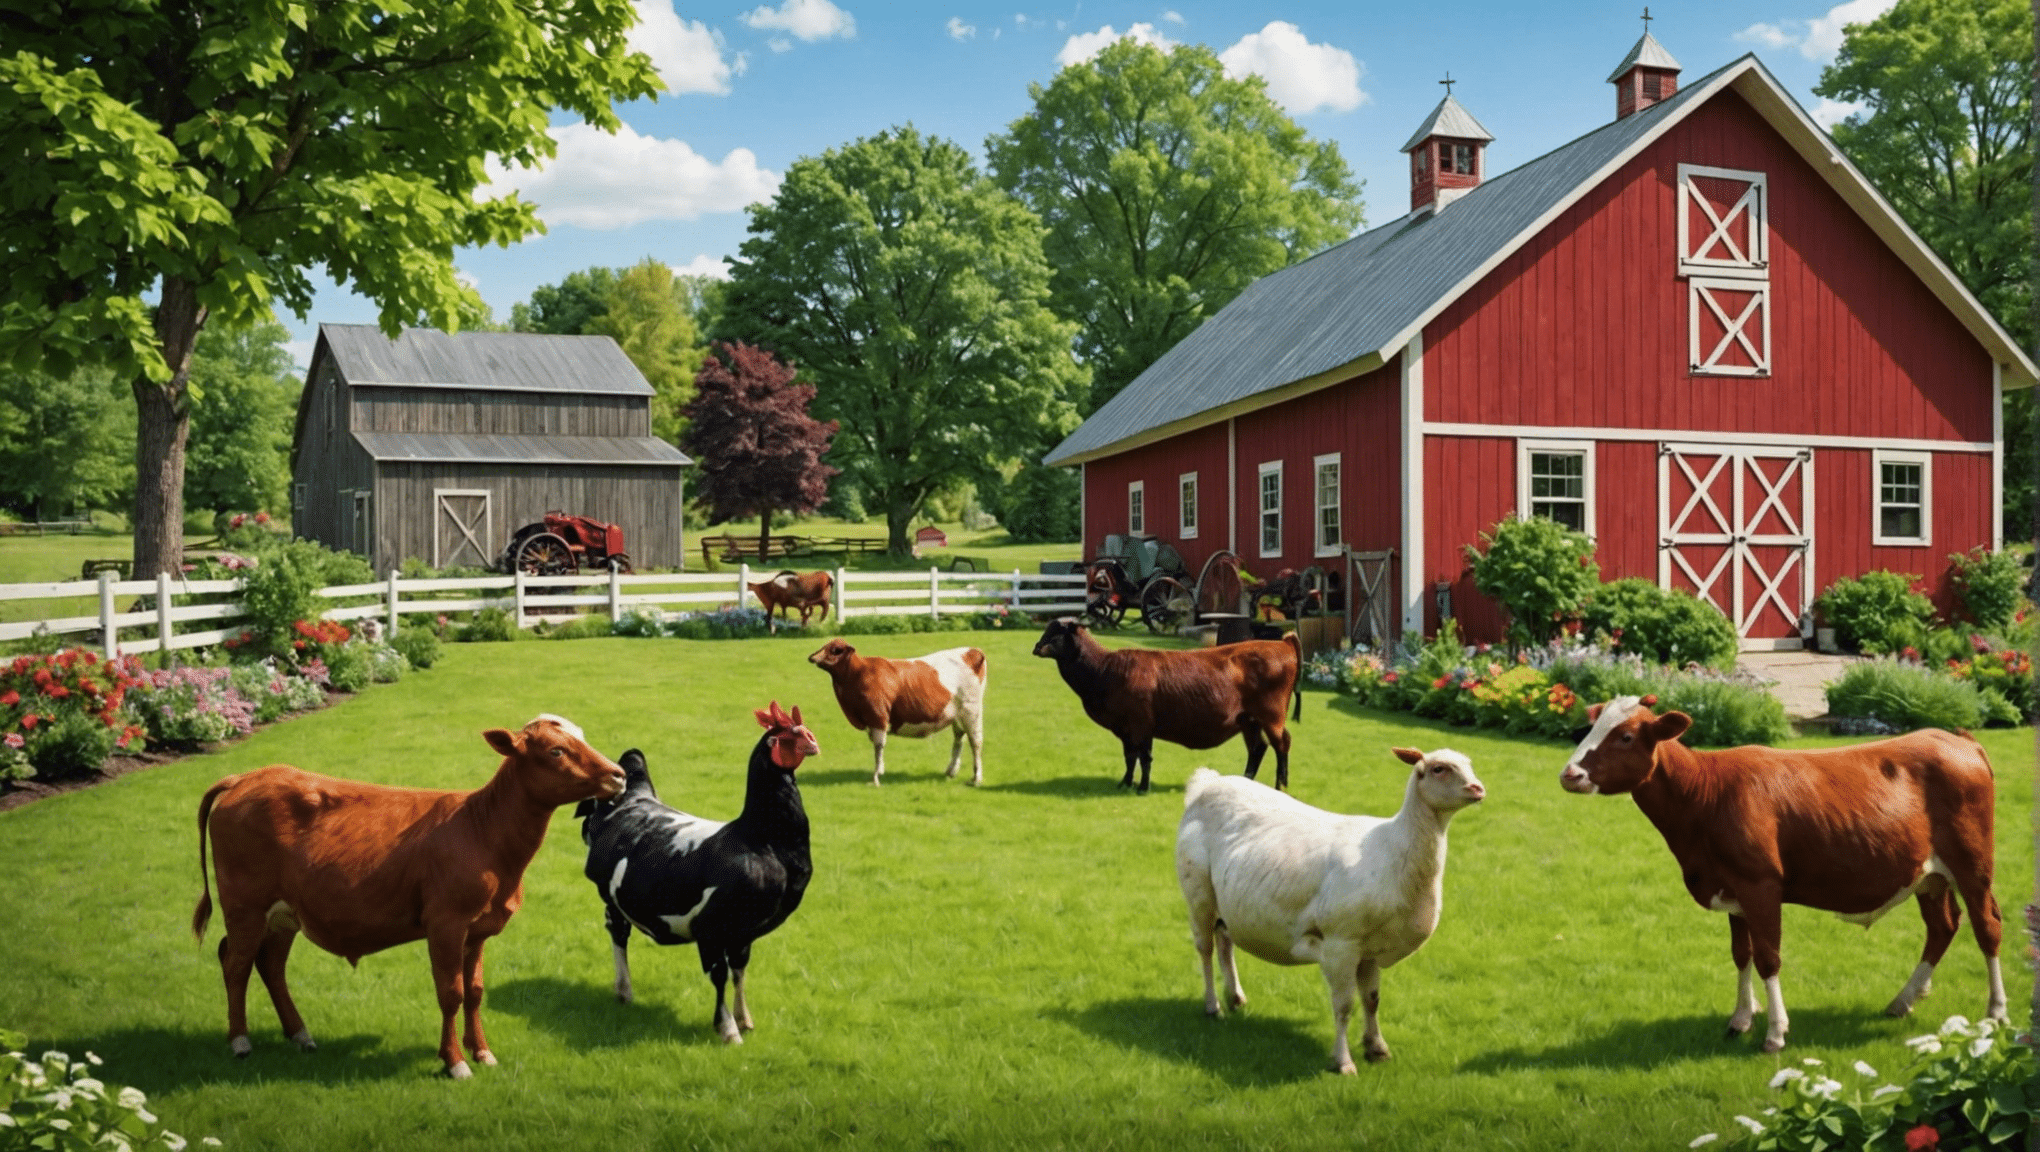 discover the advantages of having backyard farm animals at home and find out if they are a perfect fit for your lifestyle.